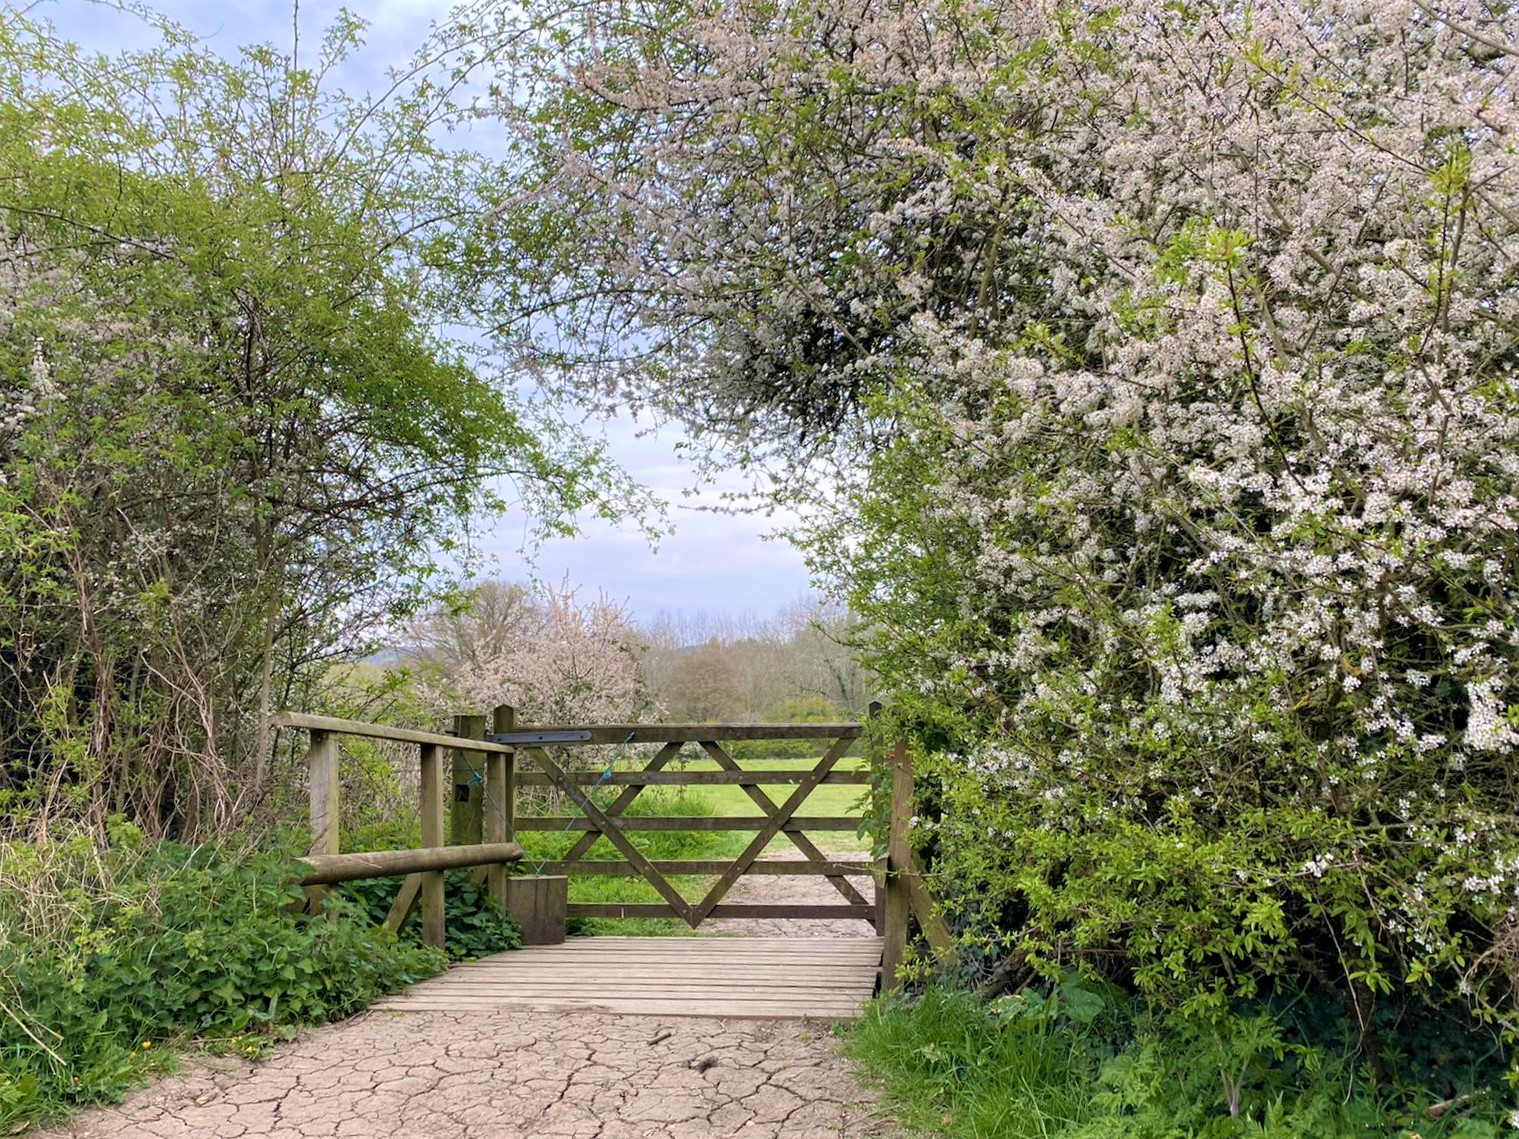 A gate in the Forest surrounded by flowering trees